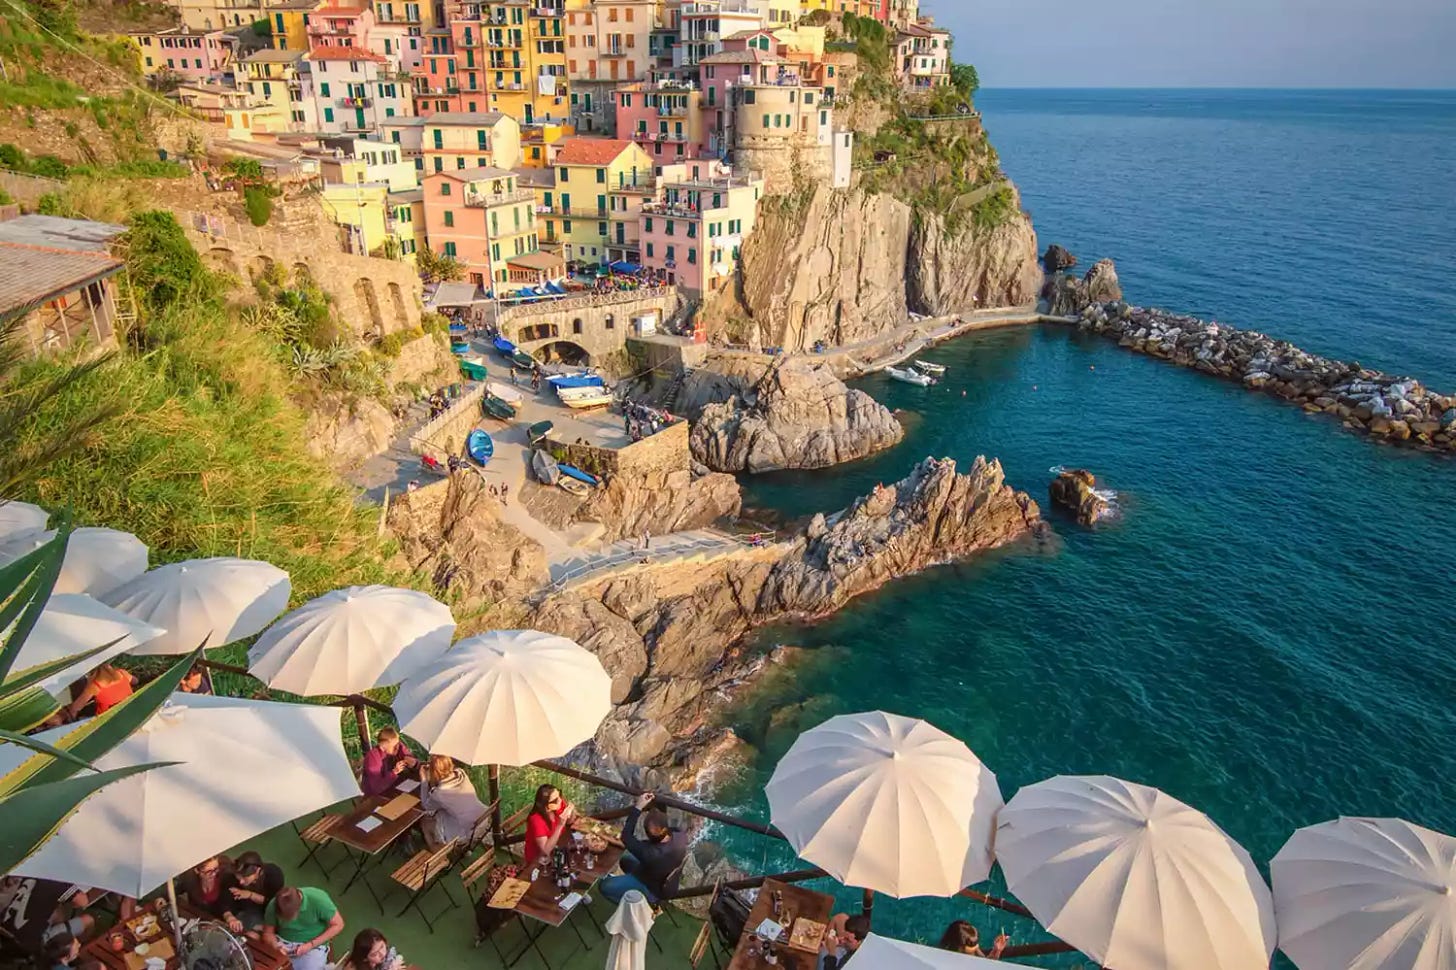 Looking down on tables at Nessun Dorma with a view of the cliffs of Cinque Terre